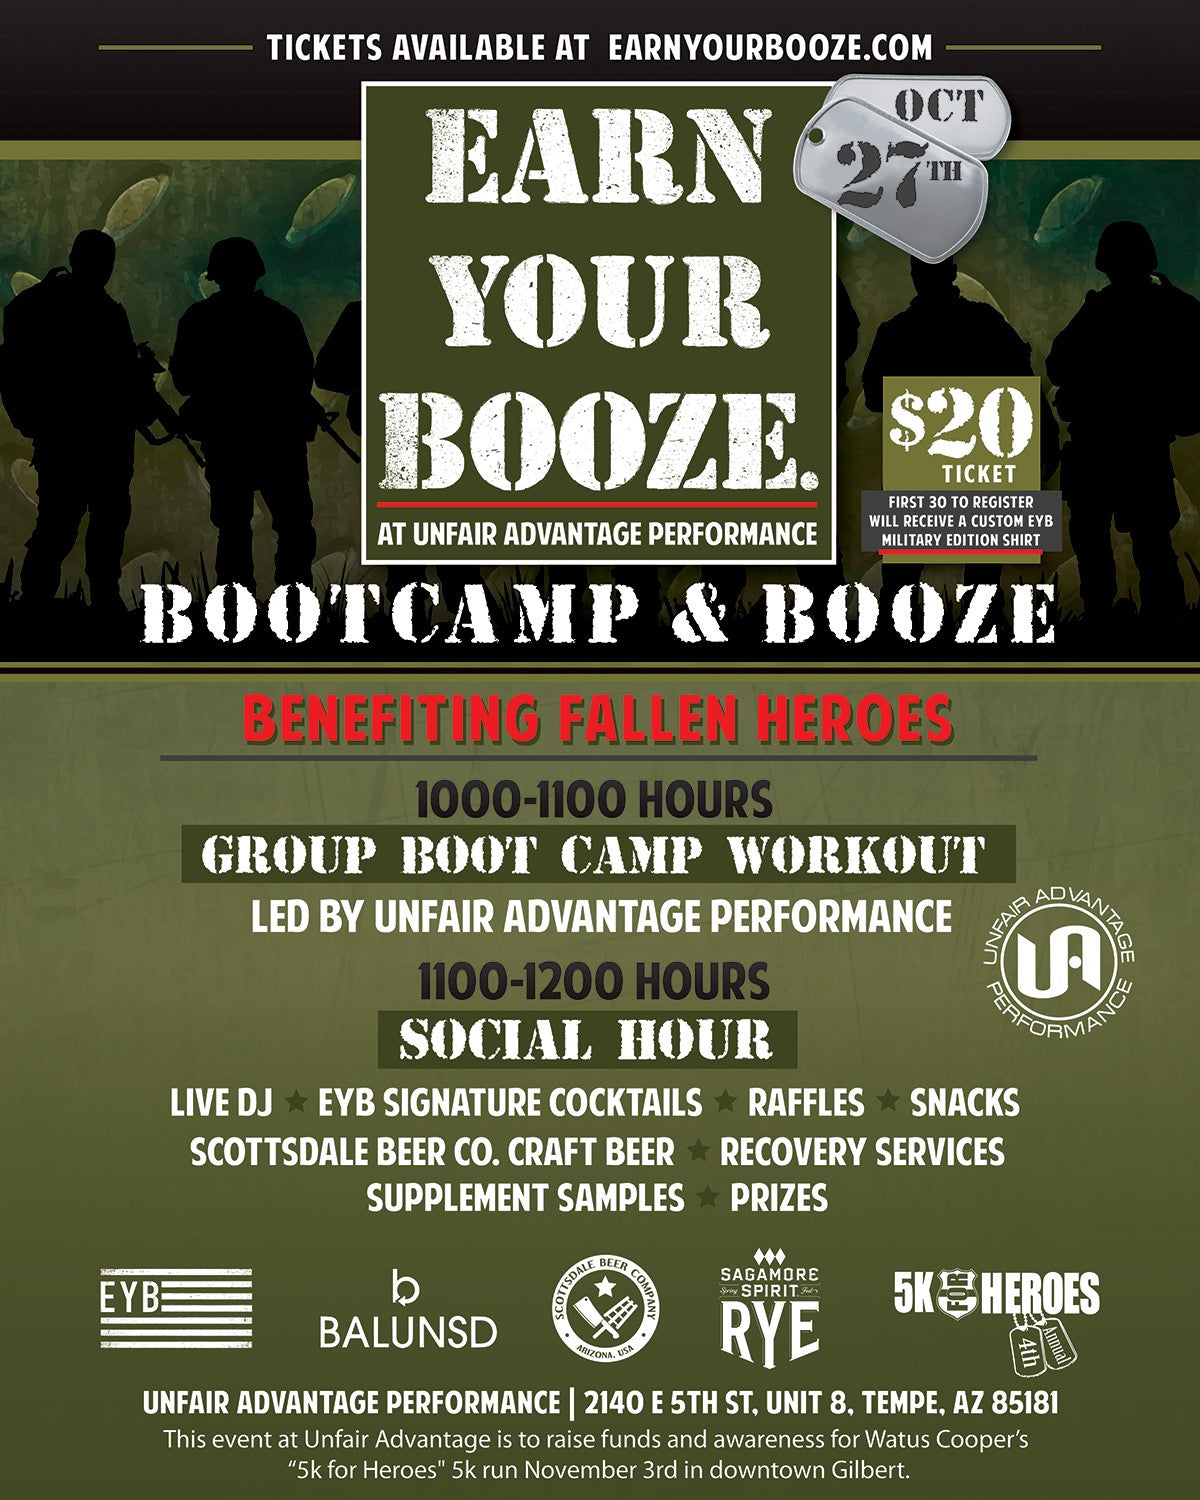 EARN YOUR WHISKEY | Bootcamp & Booze w/ Unfair Advantage 28OCT18Earn Your Booze